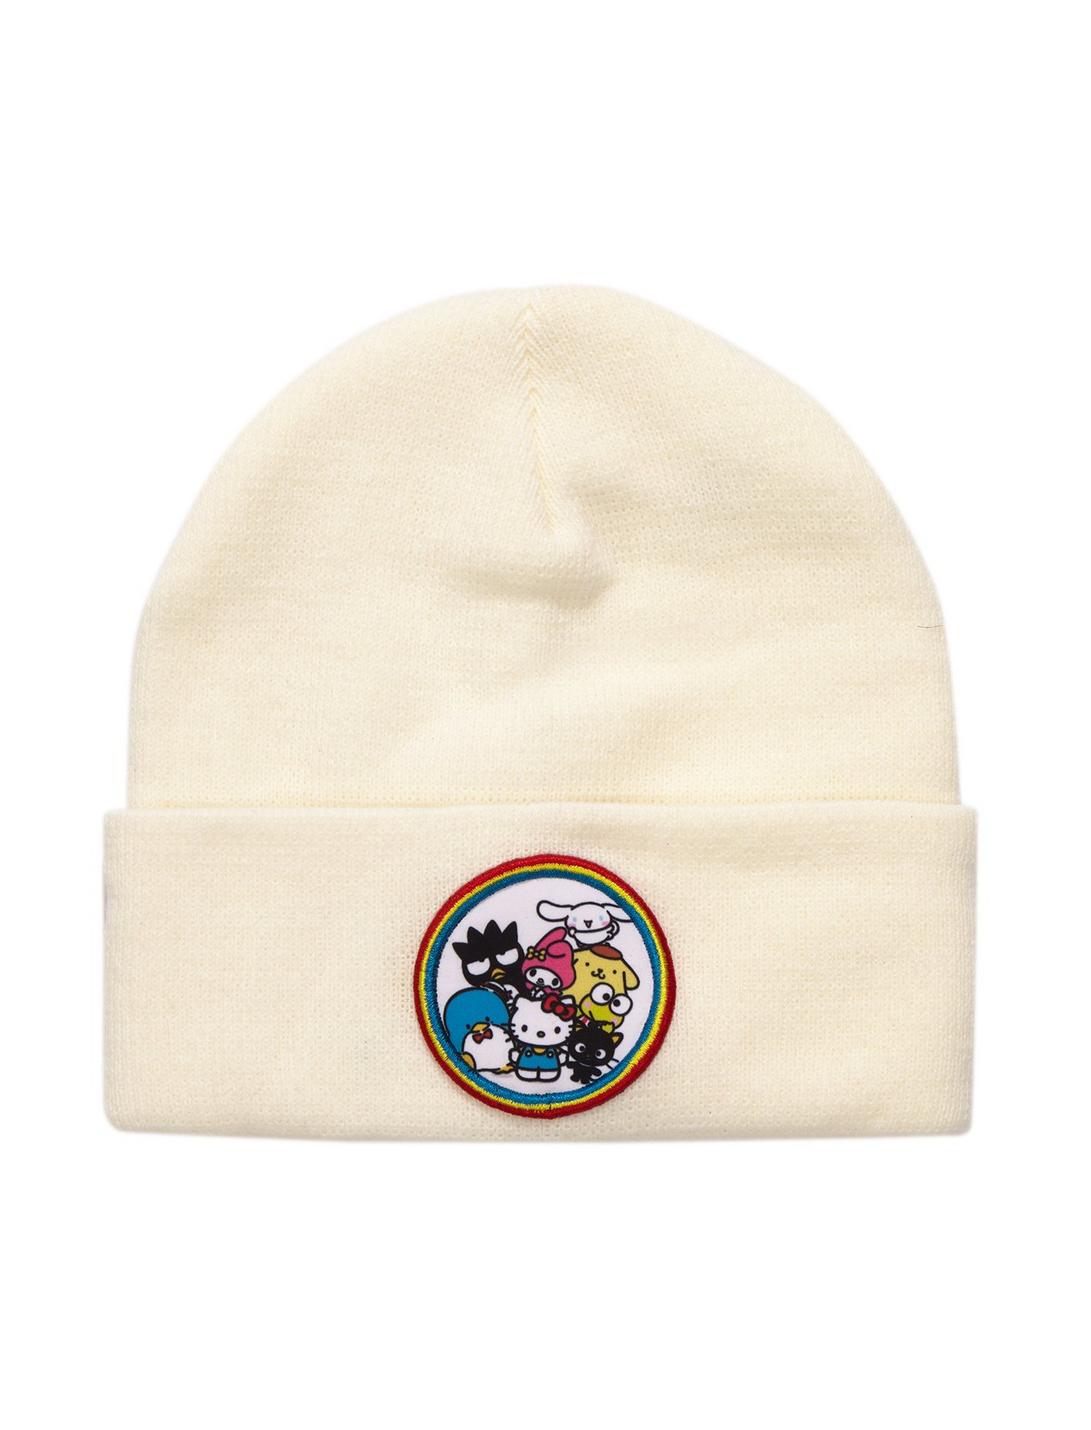 Sanrio Hello Kitty & Friends Patch Cuff Beanie - BoxLunch Exclusive, , hi-res